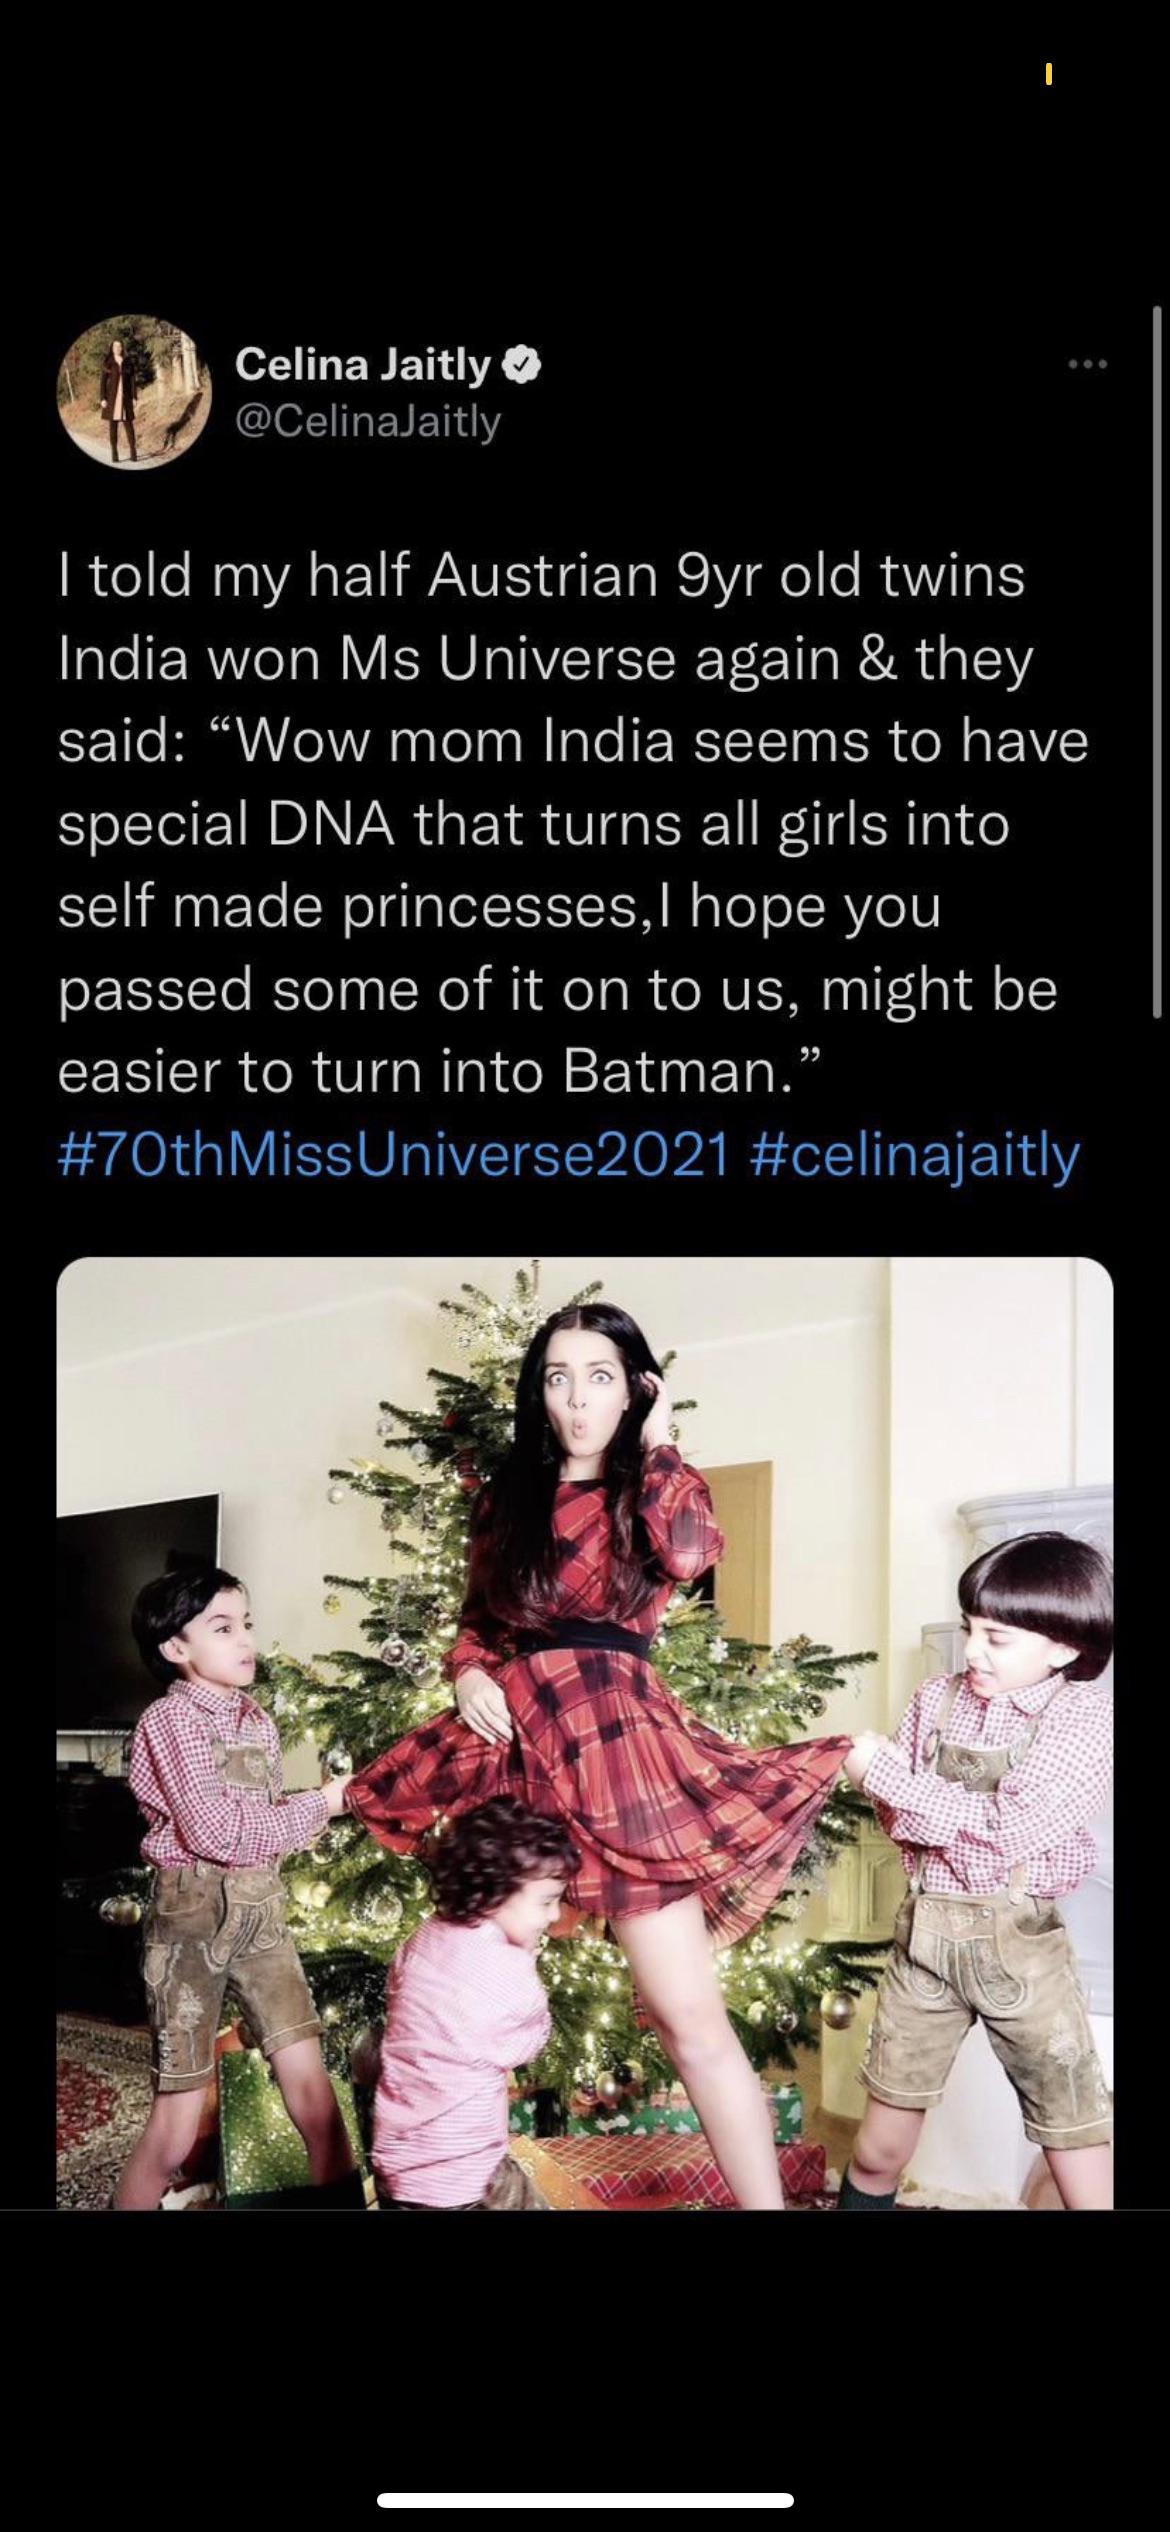 people lying online for cloout - flower - Celina Jaitly I told my half Austrian Syr old twins India won Ms Universe again & they said Wow mom India seems to have special Dna that turns all girls into self made princesses, I hope you passed some of it on t